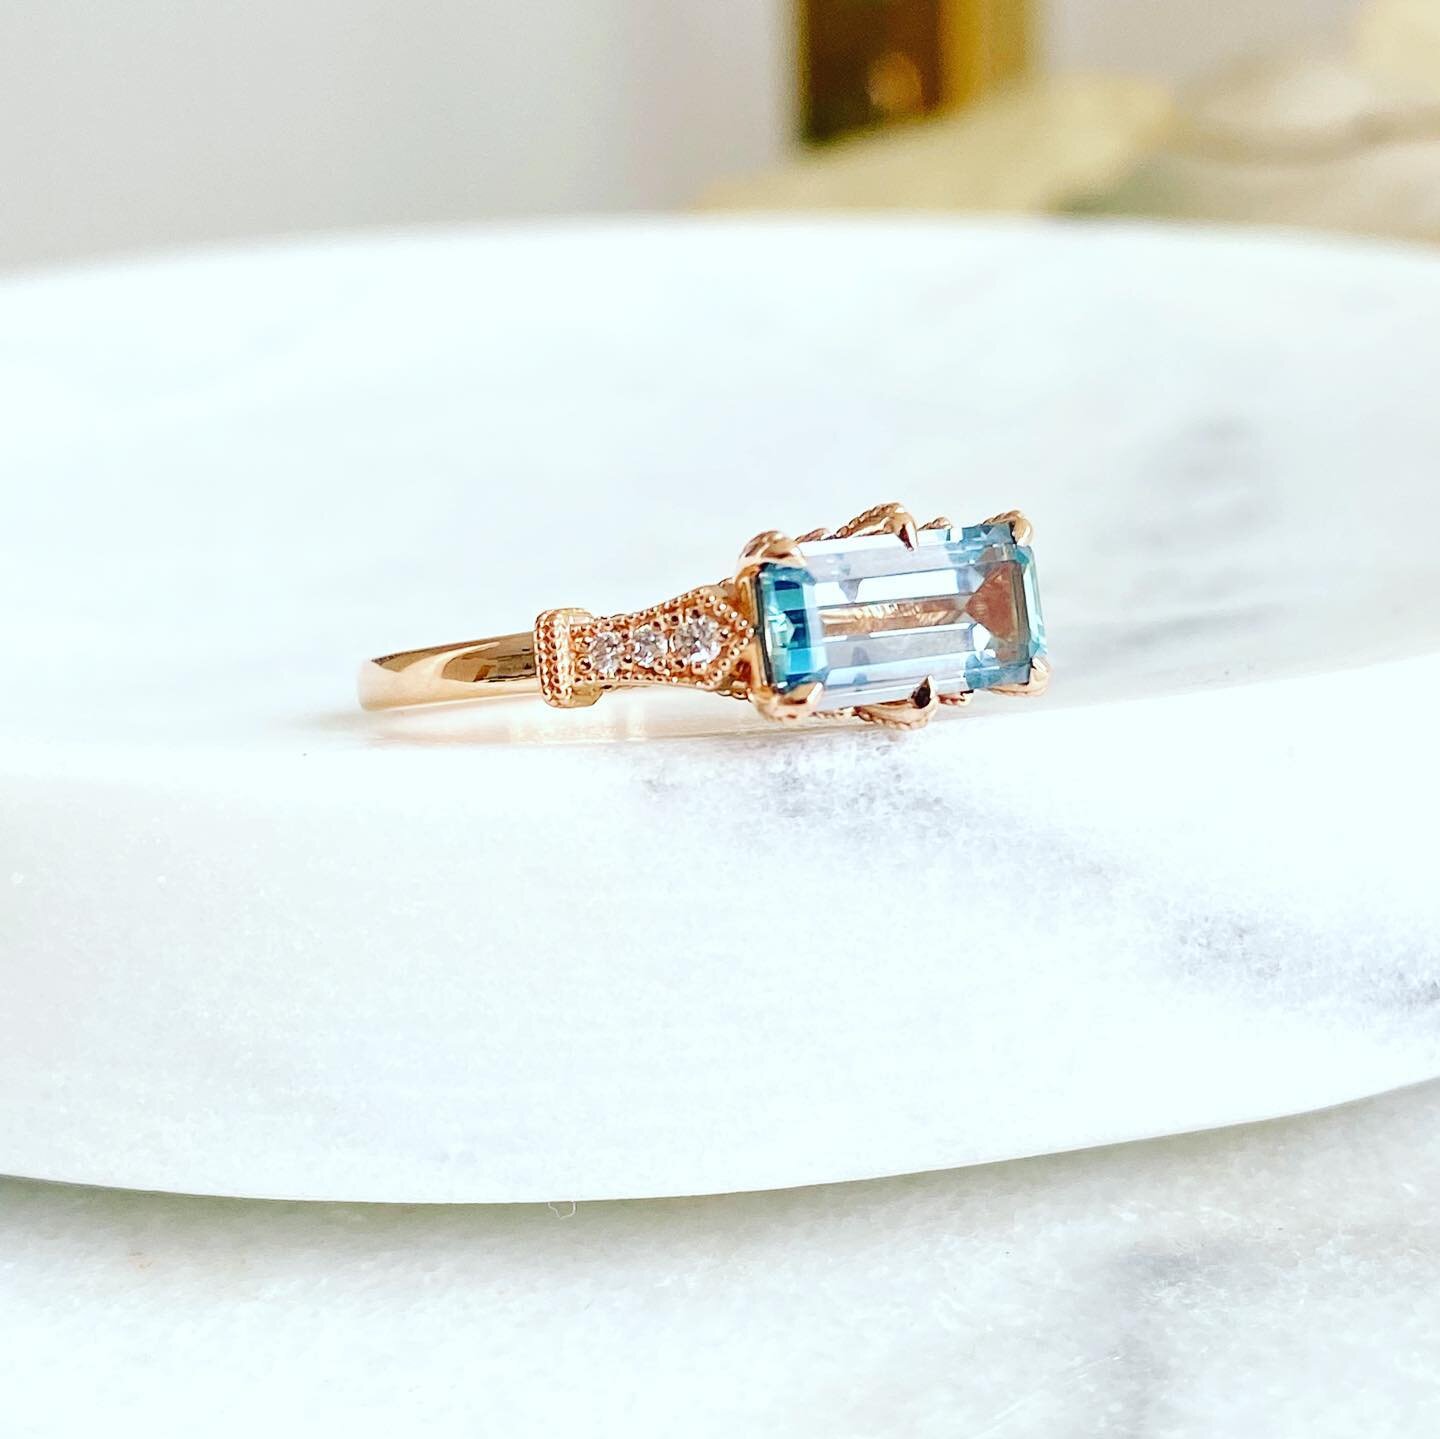 Color Makes Me Happy ✨🌈
⠀⠀⠀⠀⠀⠀⠀⠀⠀
How does this custom Montana Sapphire rose gold ring make you feel? Set horizontally in a simply perfect rose gold Art Deco custom designed setting with claw prongs
⠀⠀⠀⠀⠀⠀⠀⠀⠀
This ring makes me have alll the #friday